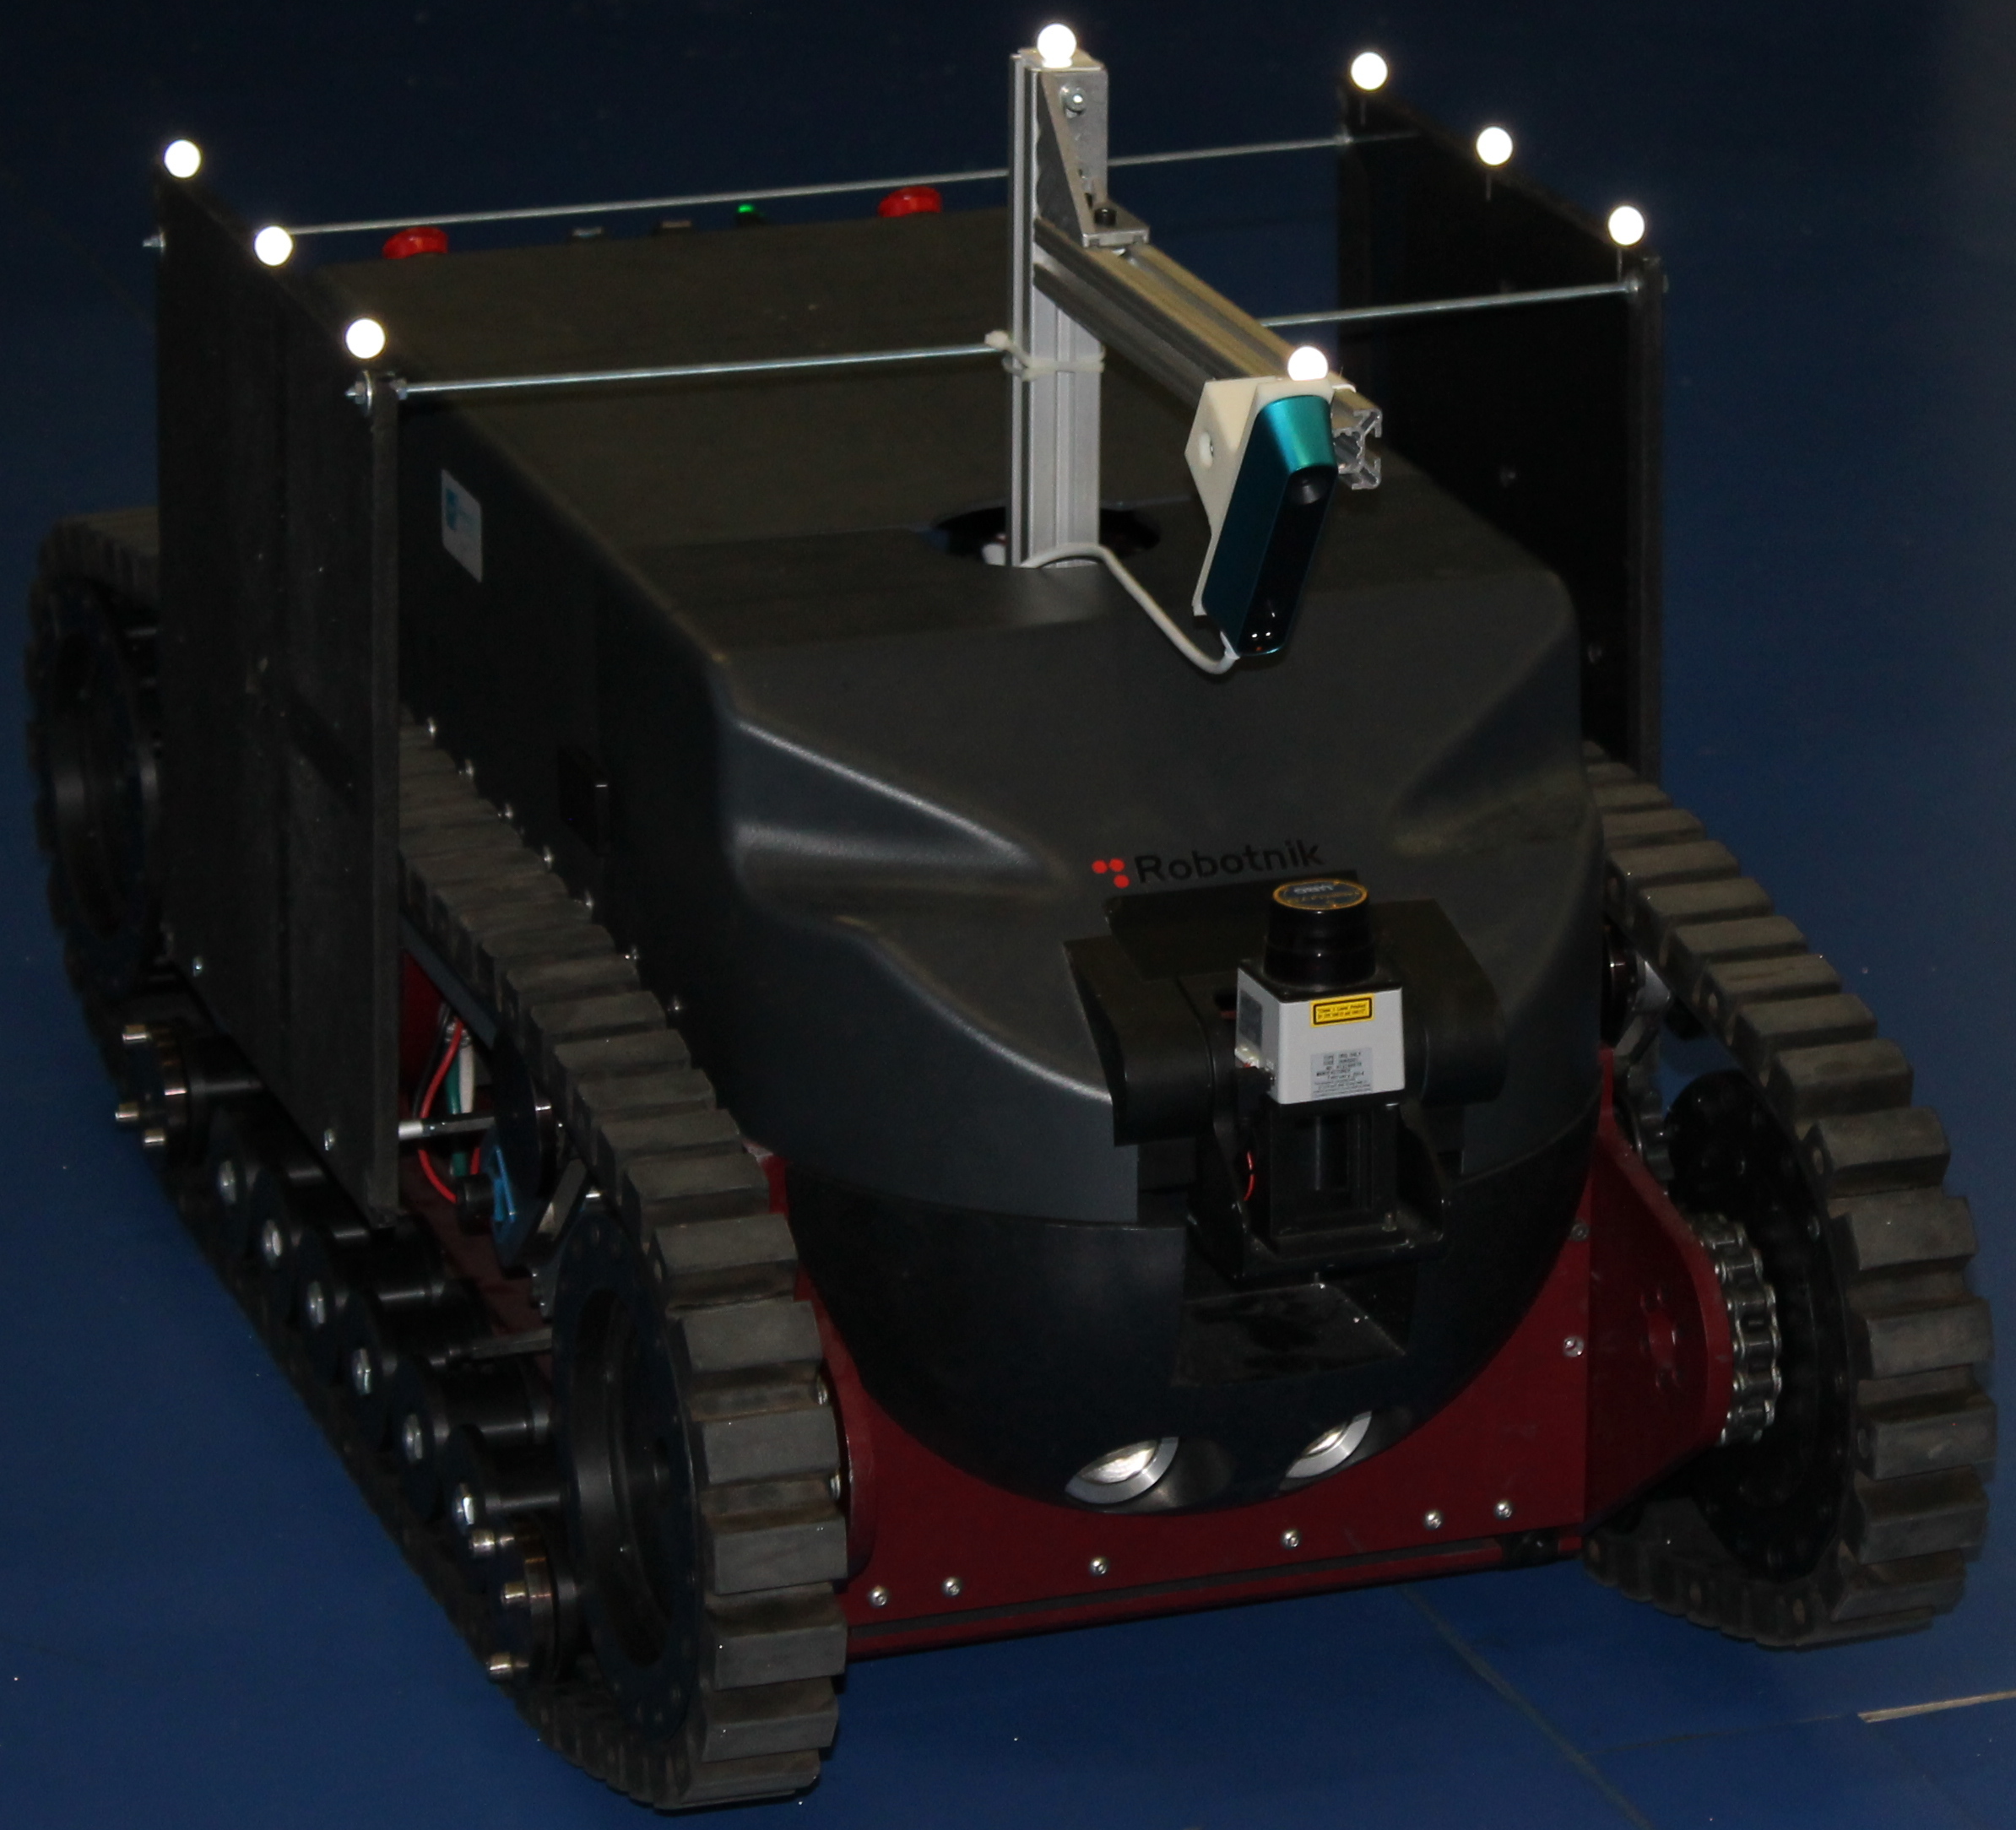 Front view of the Guardian robot